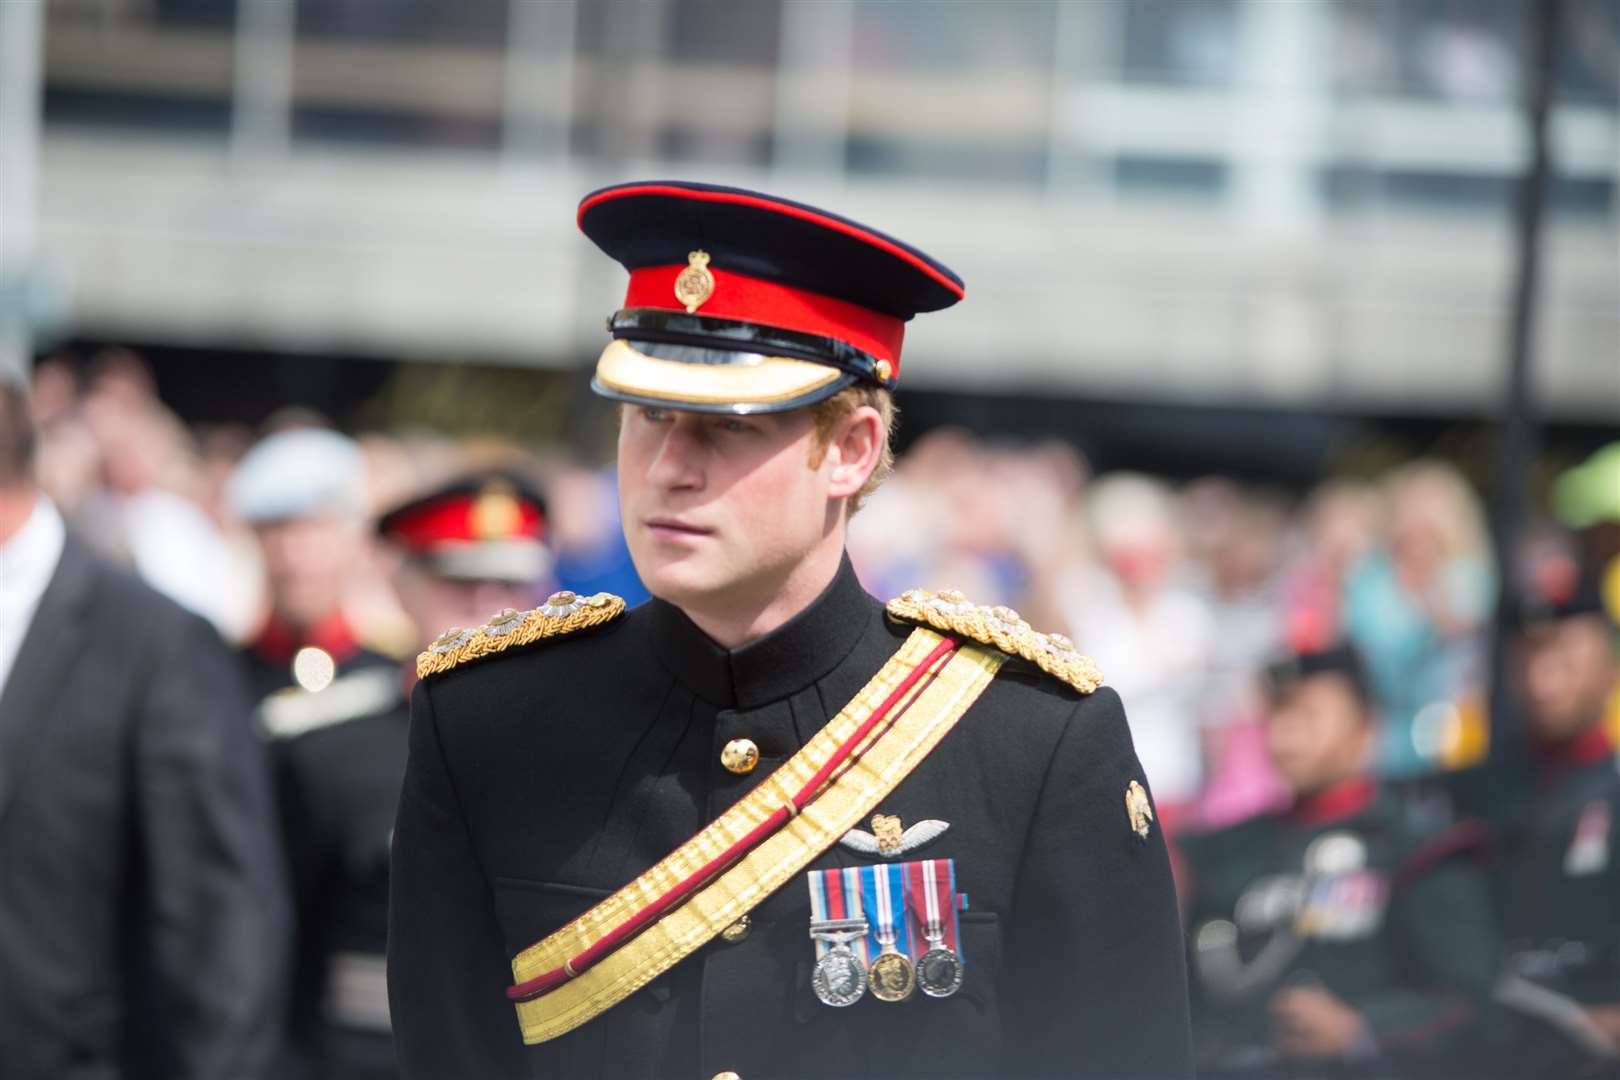 Prince Harry at the official unveiling. Photo credit: Manu Palomeque/LNP